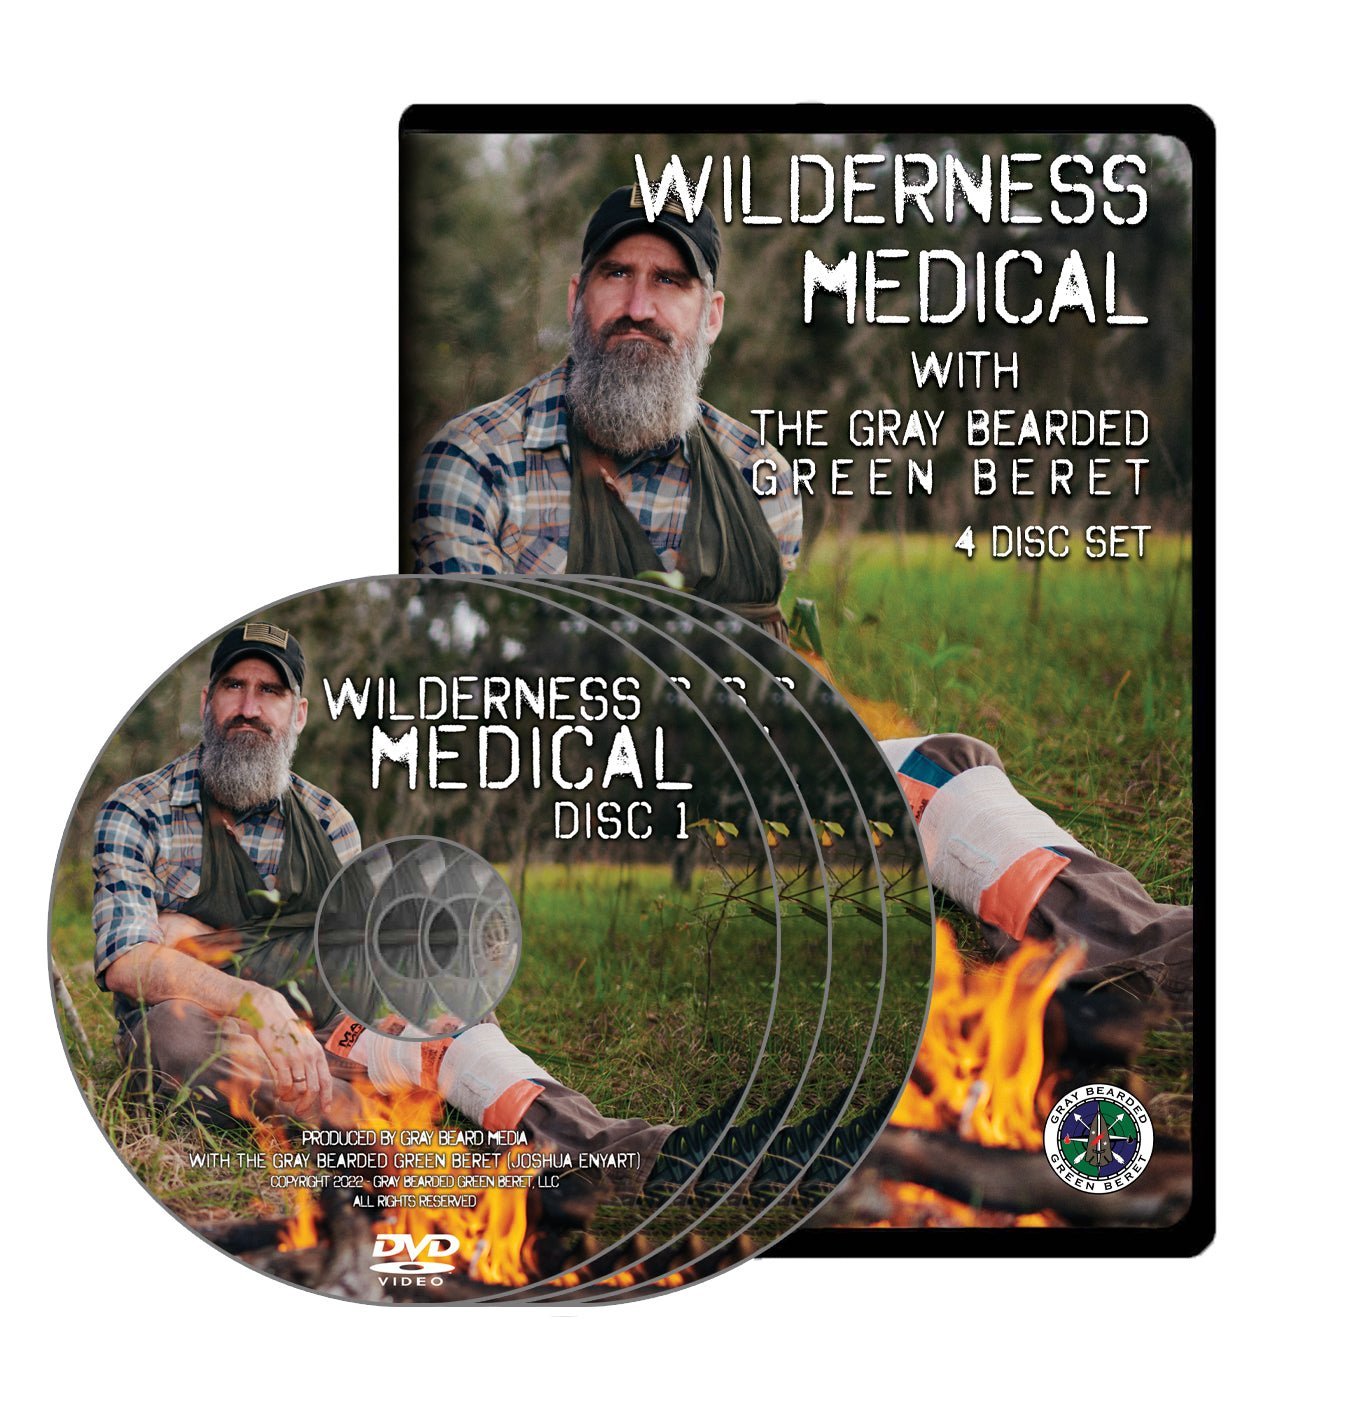 Wilderness Medical DVD + Free Streaming Limited Offer - Gray Bearded Green Beret